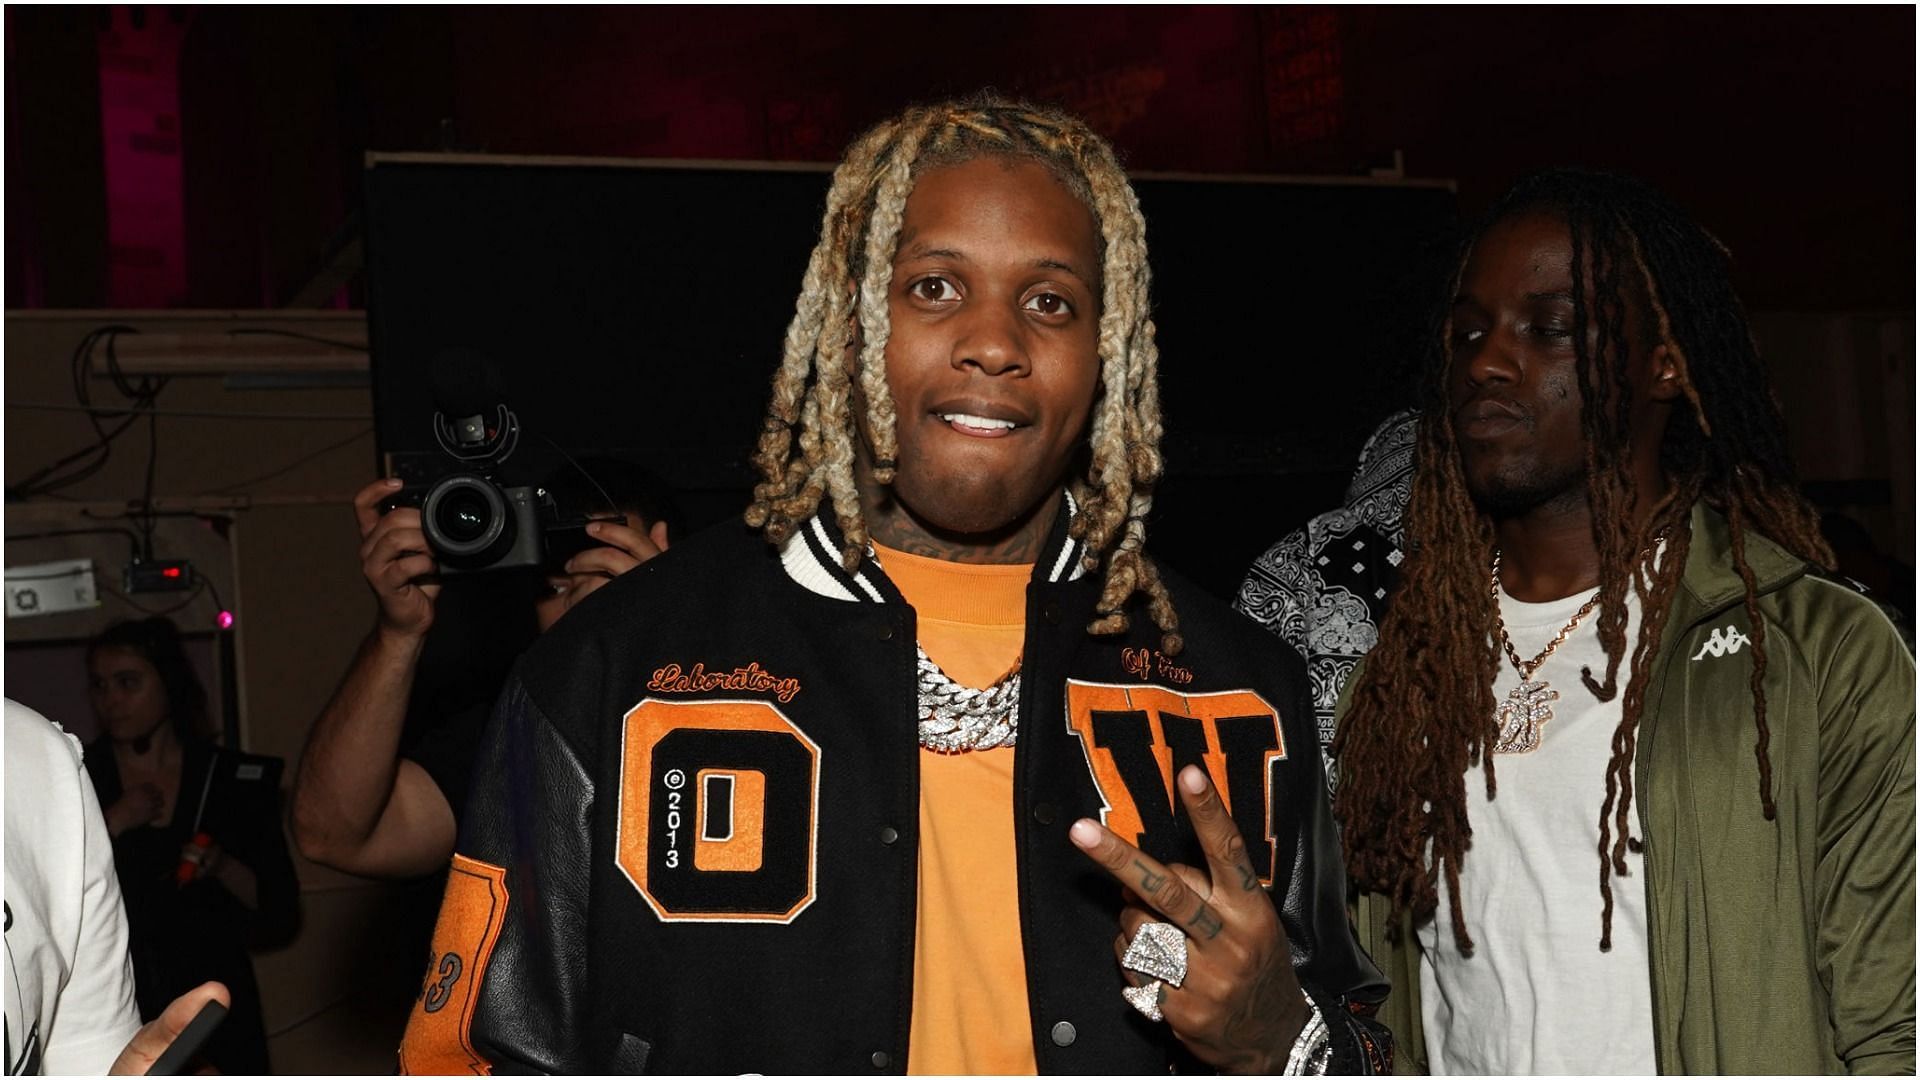 Members of Lil Durk&#039;s The Family group have been targeted and killed in the last few years (Image by Gonzalo Marroquin via Getty Images)